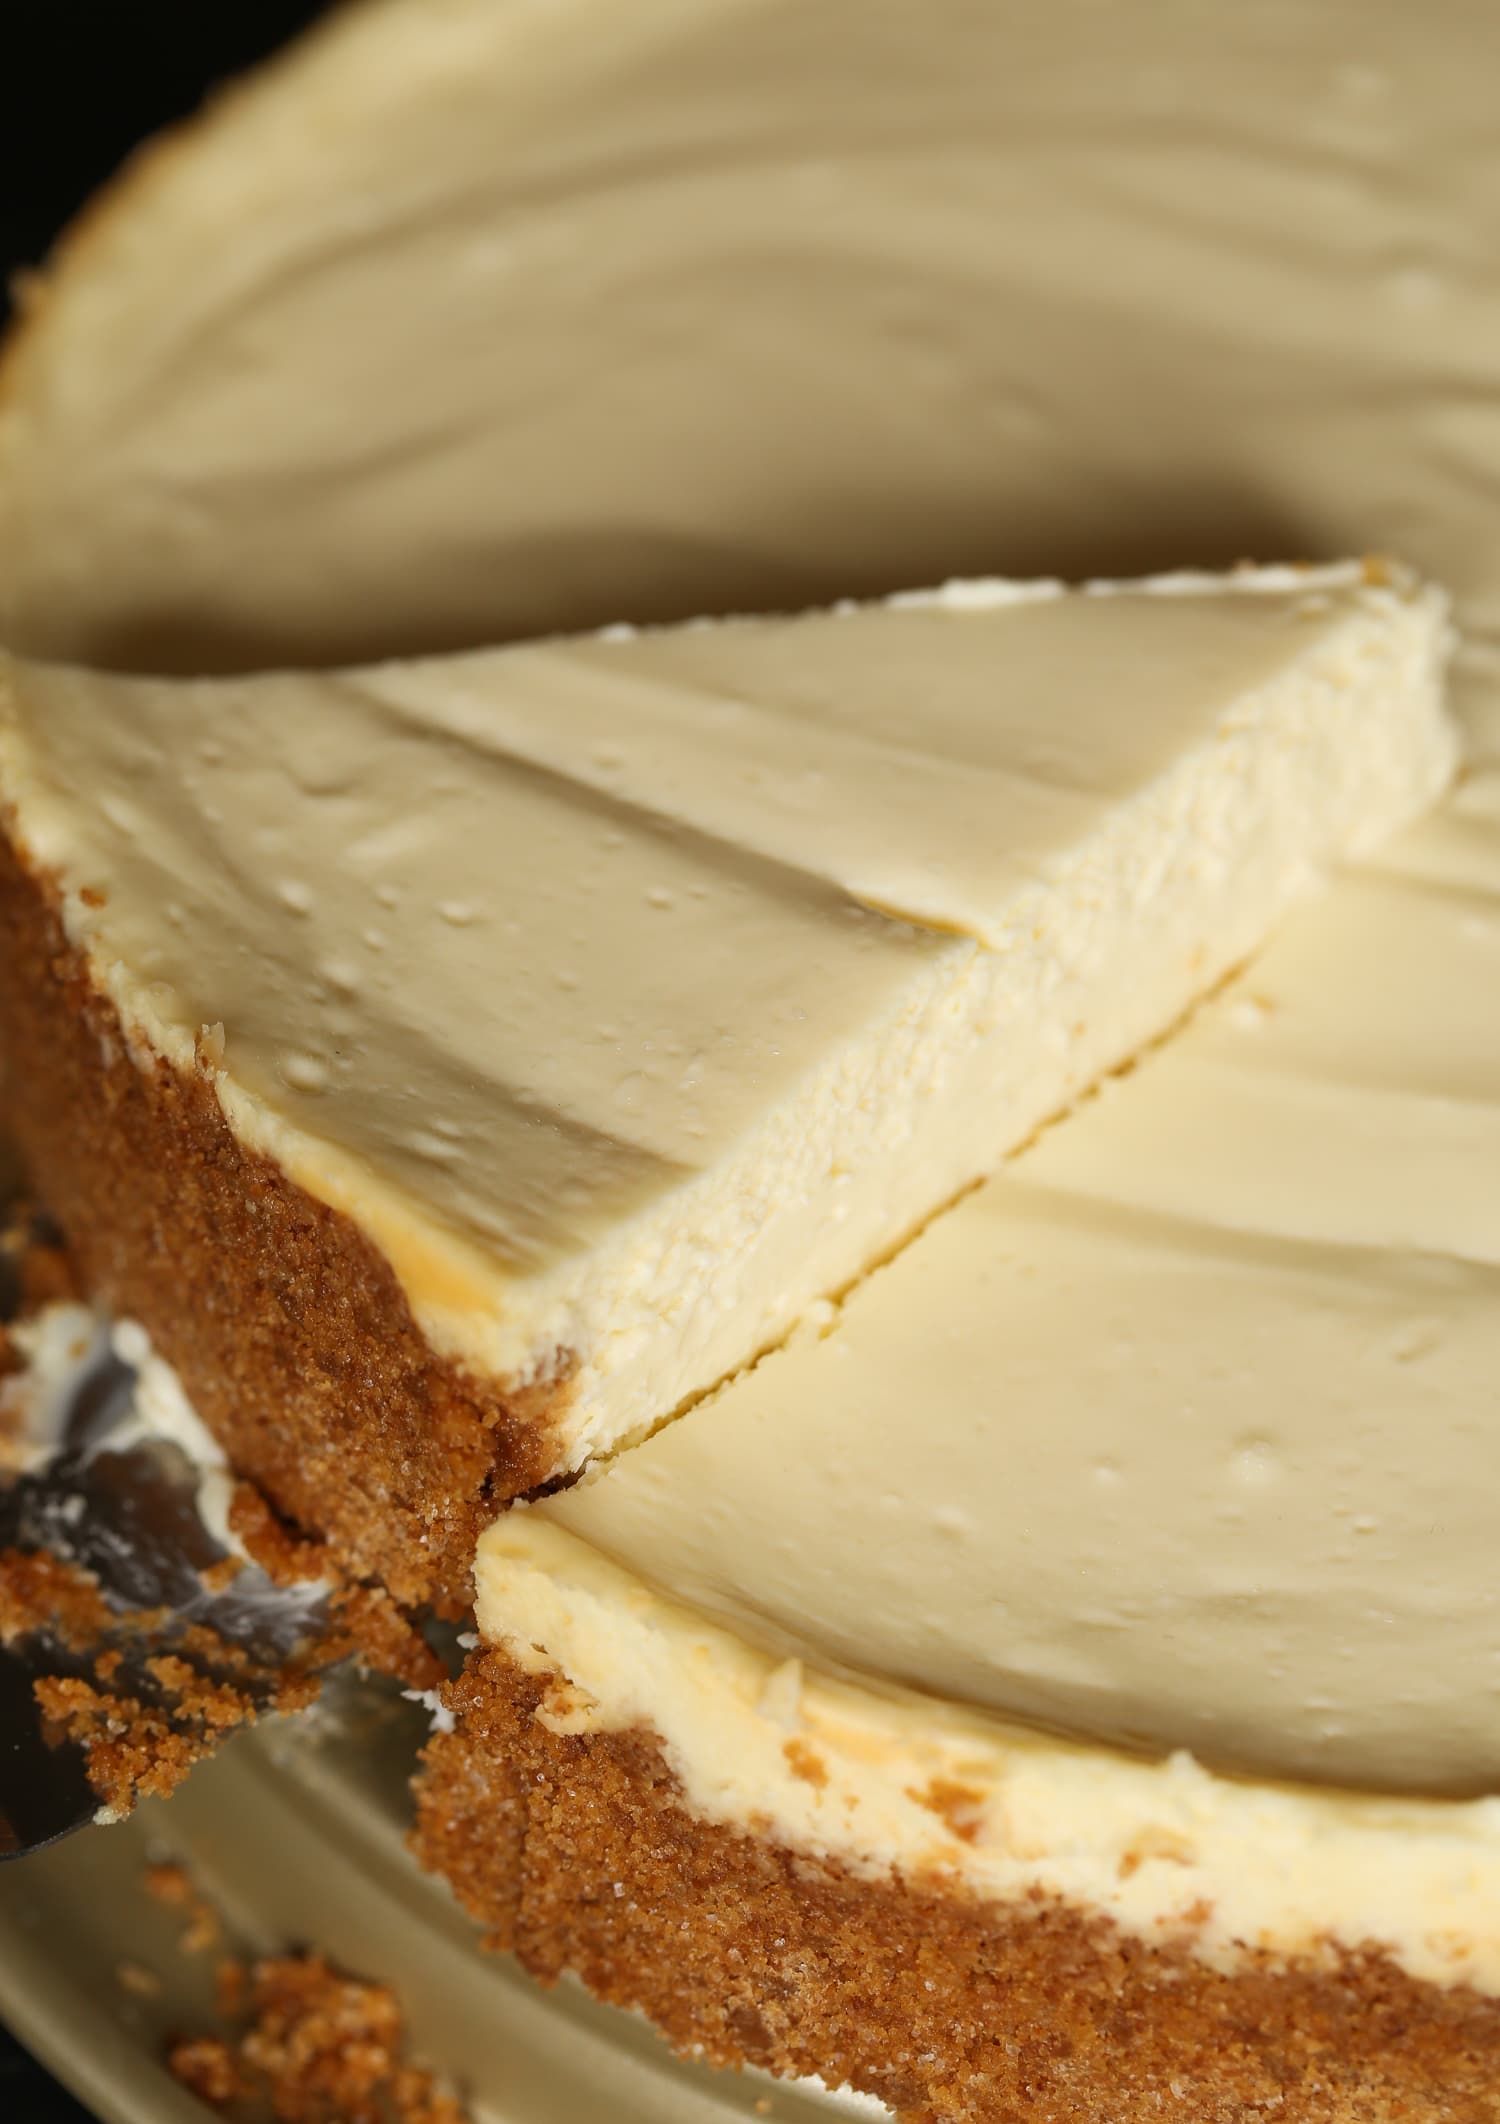 A close up of a slice of cheesecake being taken out of the whole cheesecake.